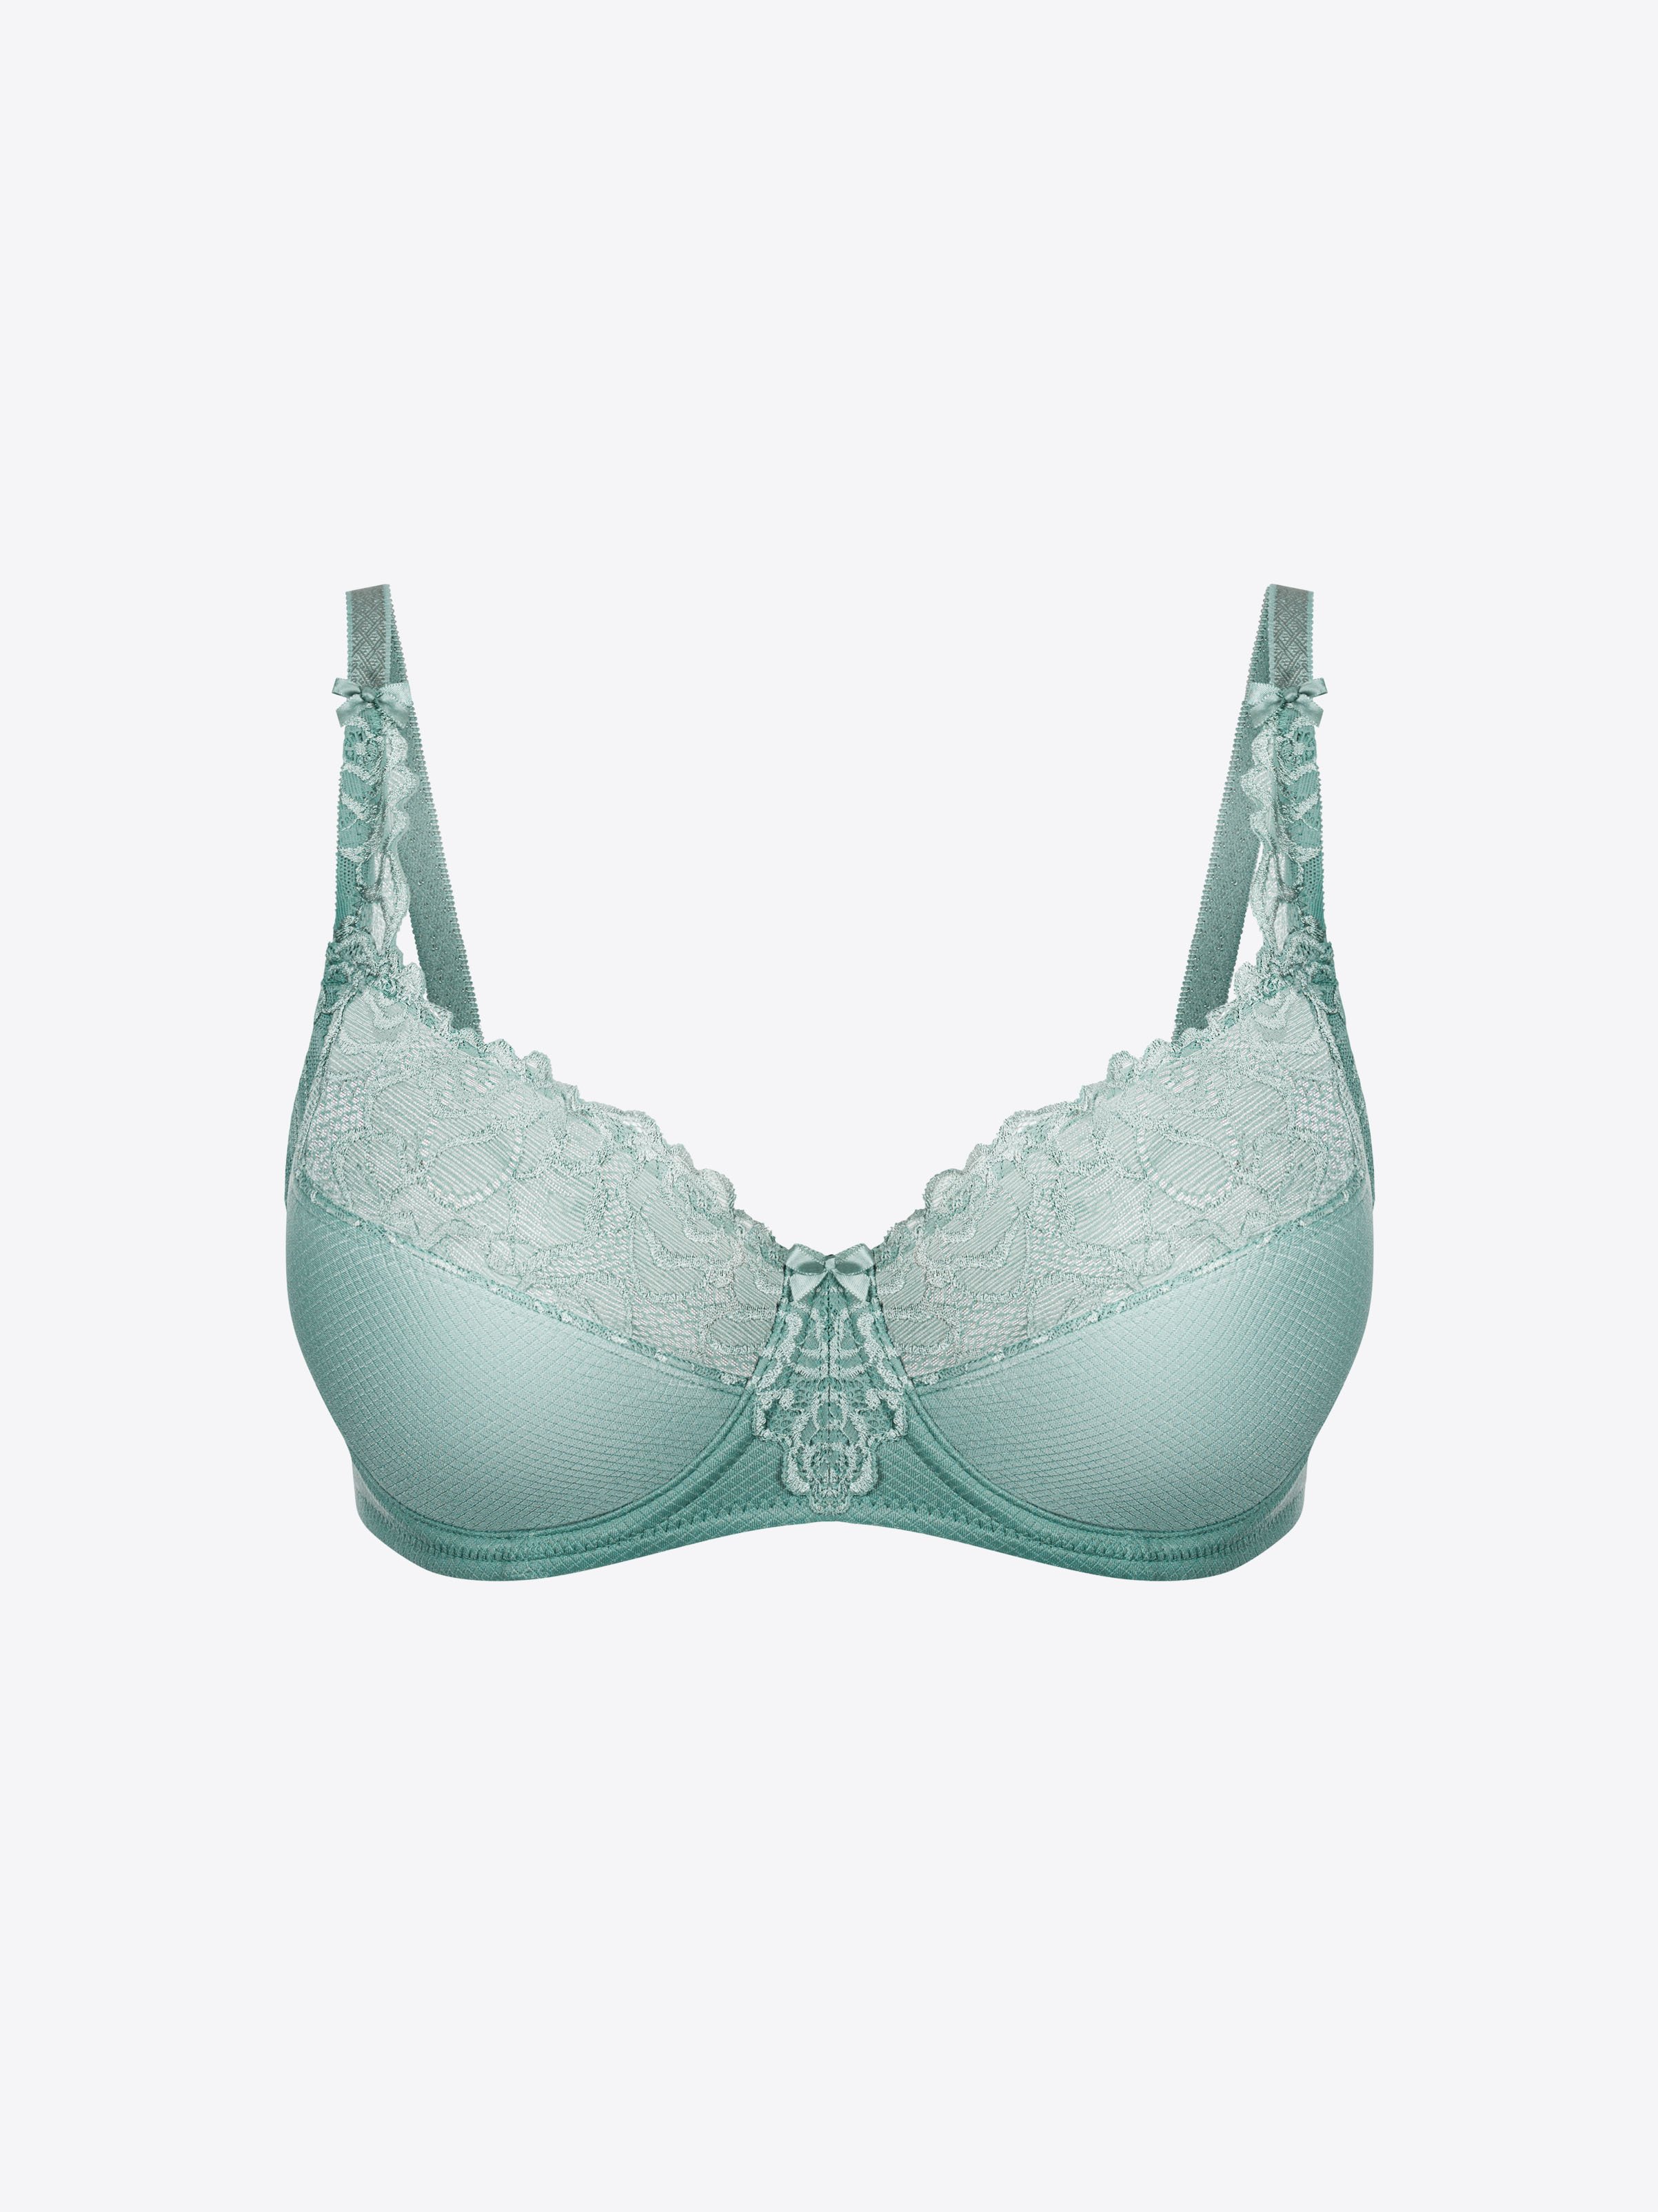 Florence Full Support Full Cup Bra - Chinois Green - CA$53.70